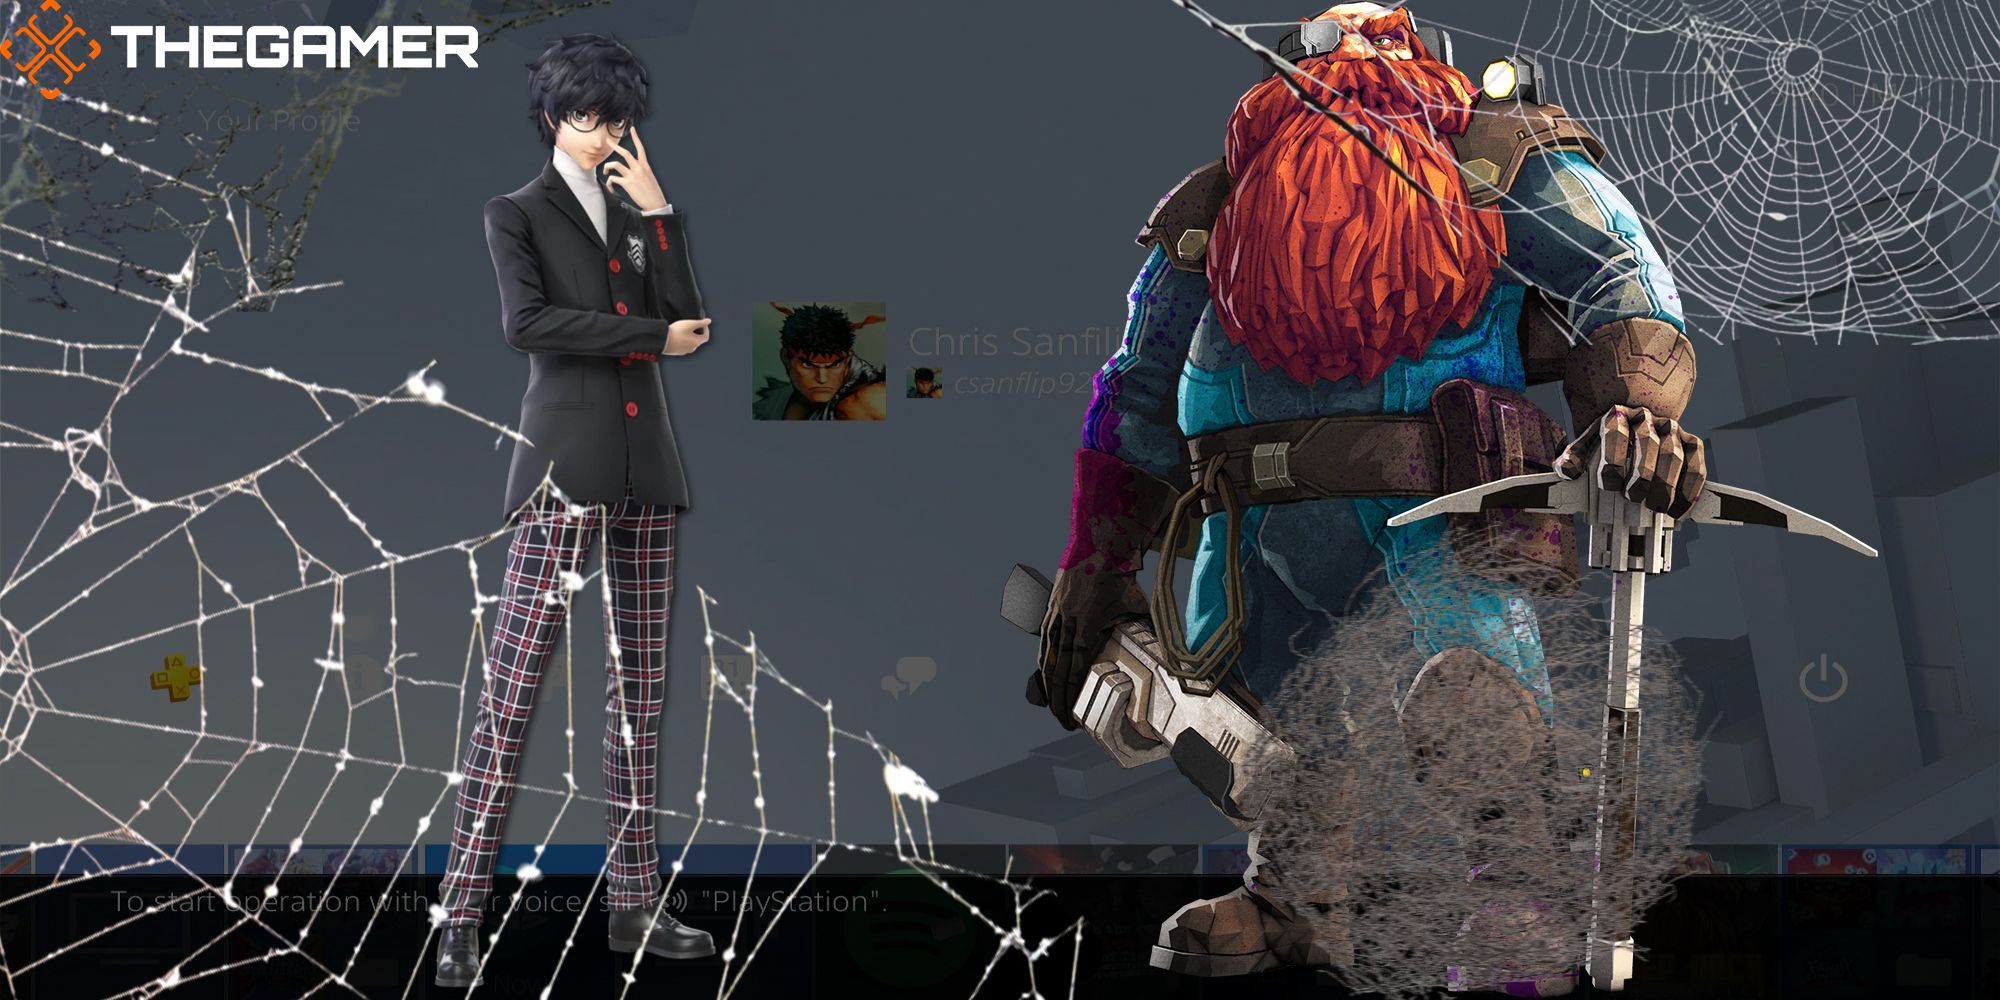 The Joker from Persona 5 and a red-haired dwarf from Deep Rock Galactic stand stoic in Chris Sanfilippo's sad PS4 homepage filled with cobwebs and tumbleweeds.